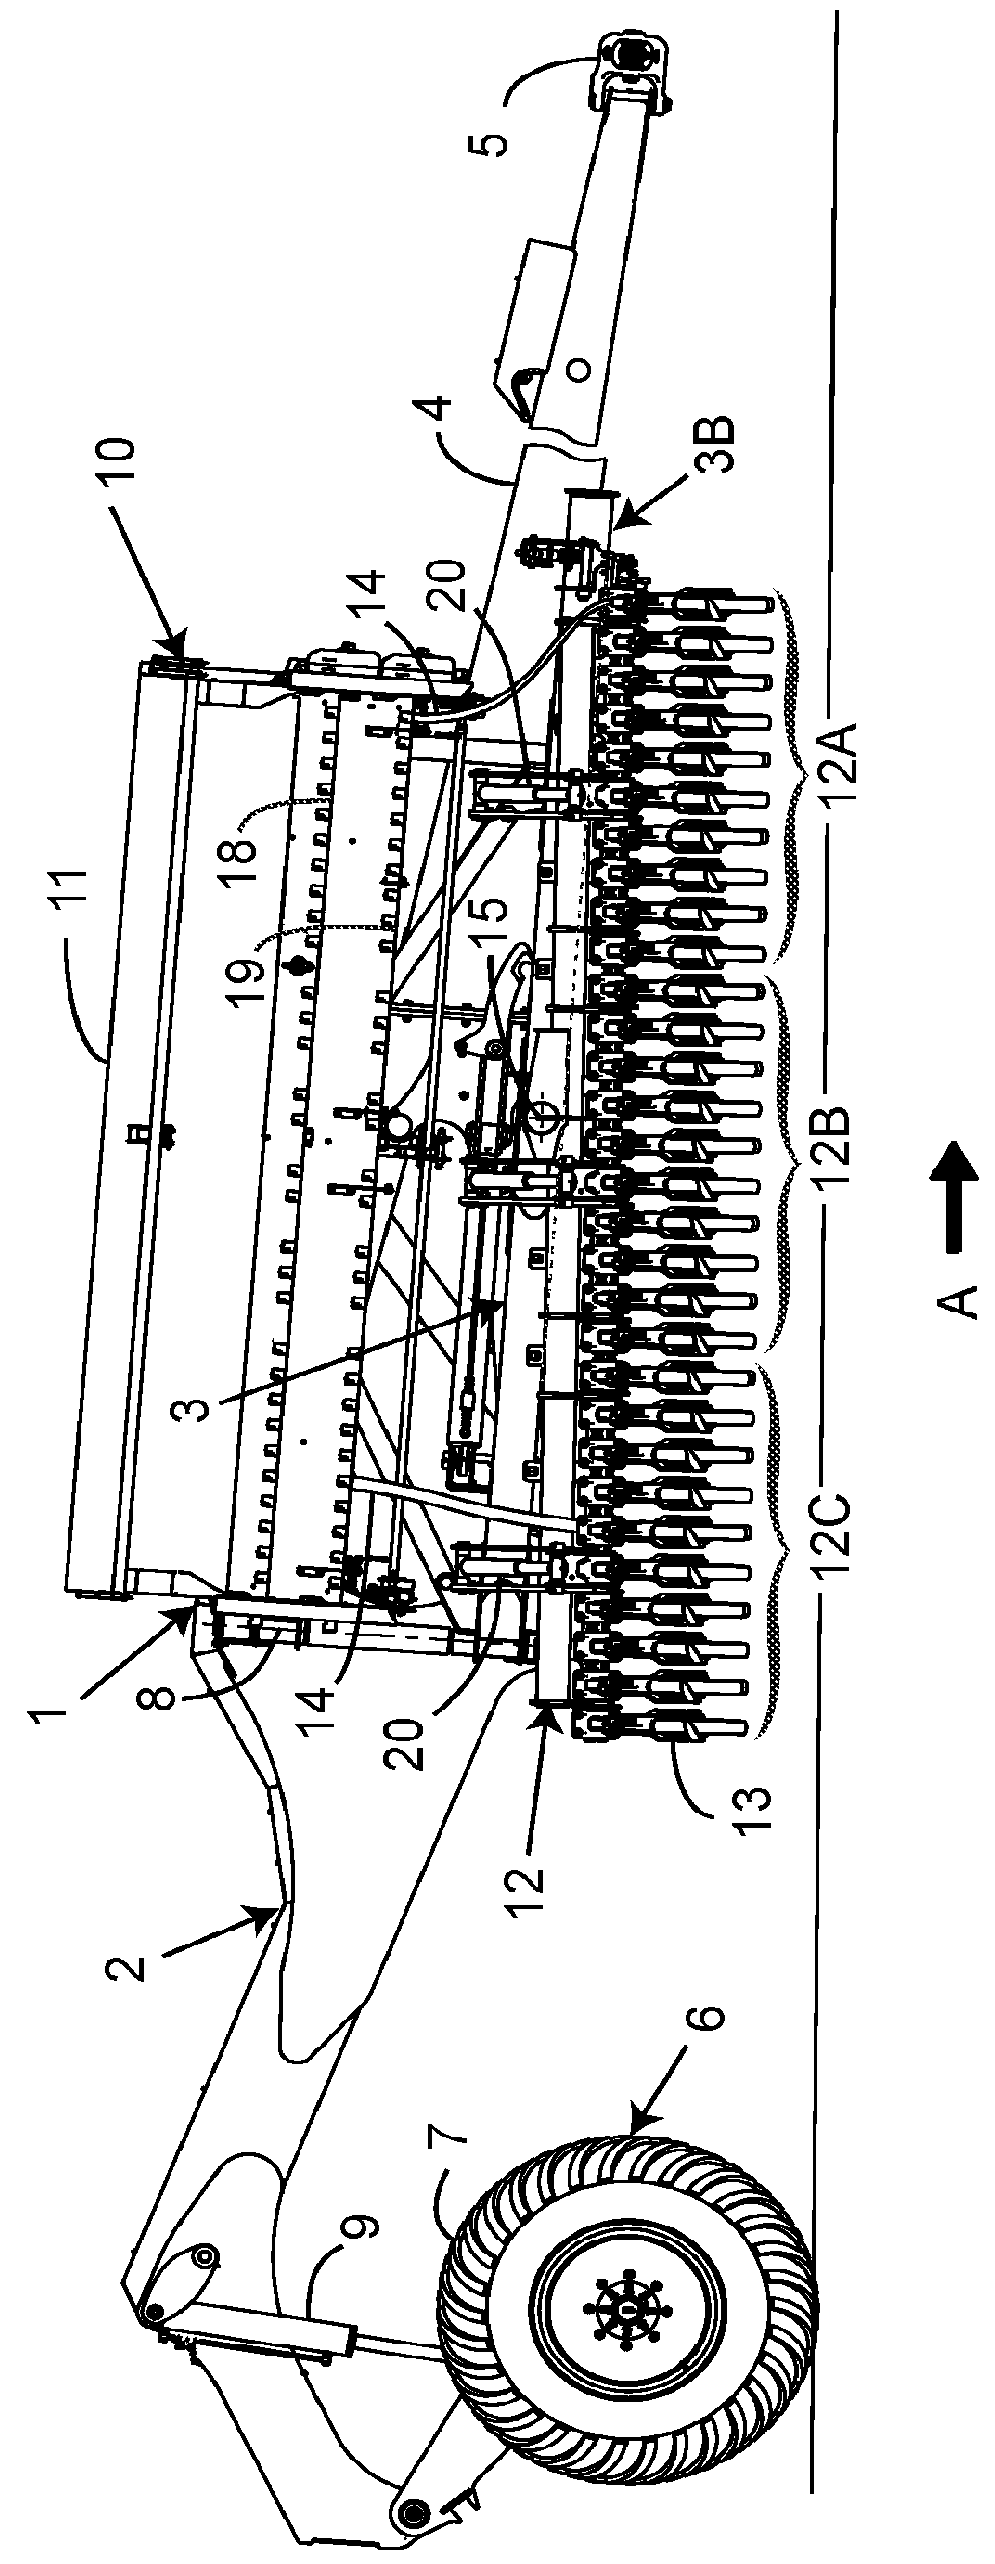 Agricultural machine with at least one articulated seeder bar